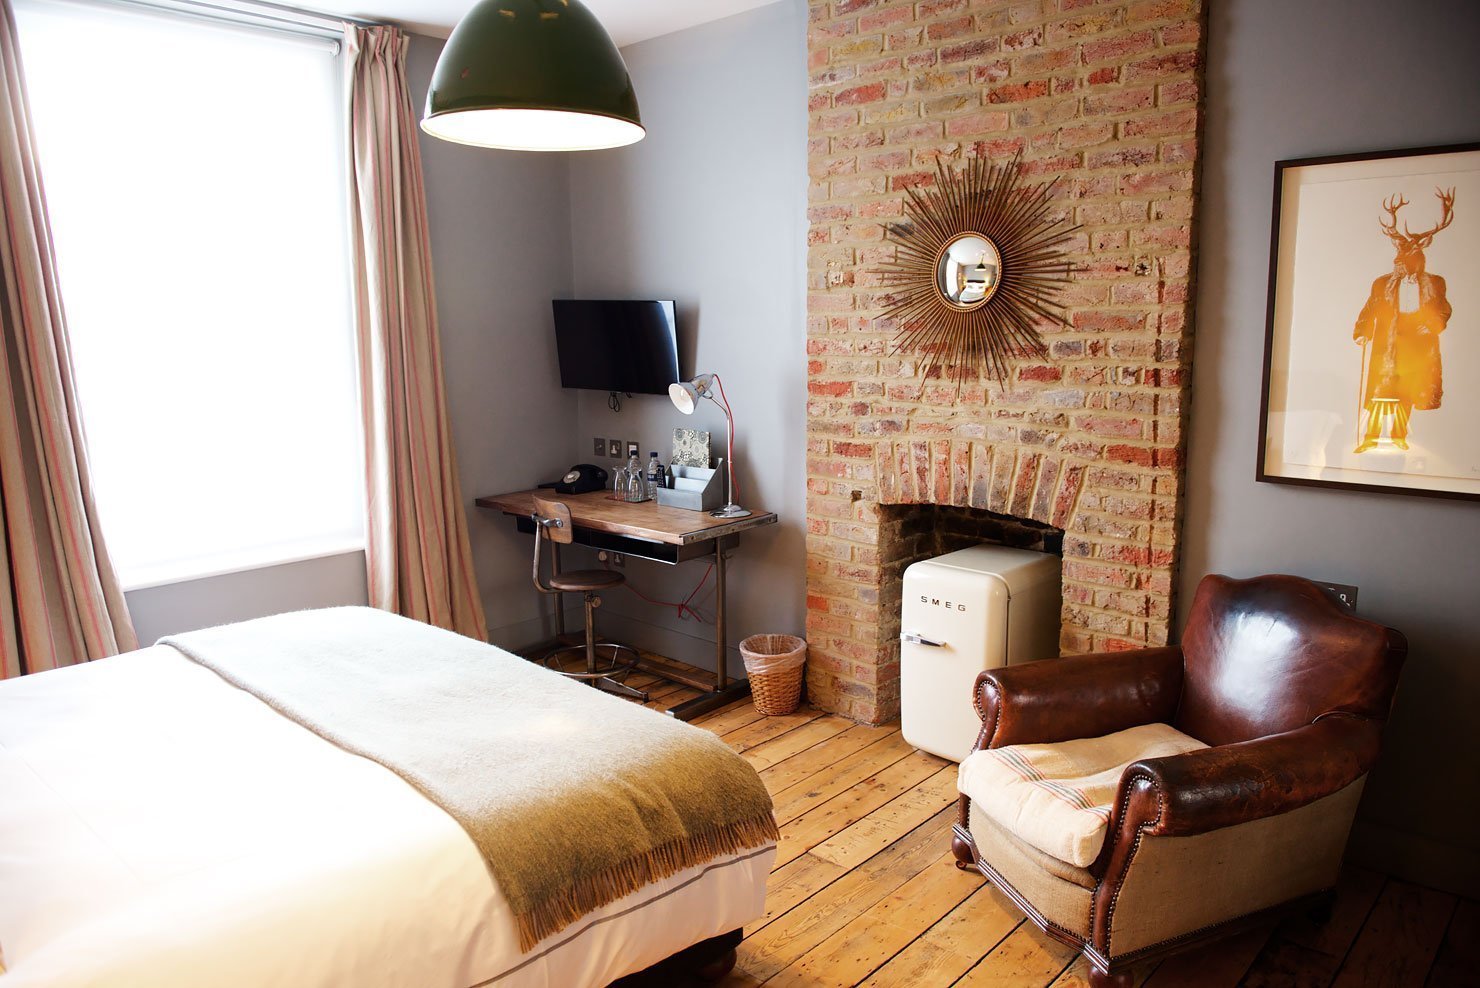 Artist Residence, a boutique hotel in London